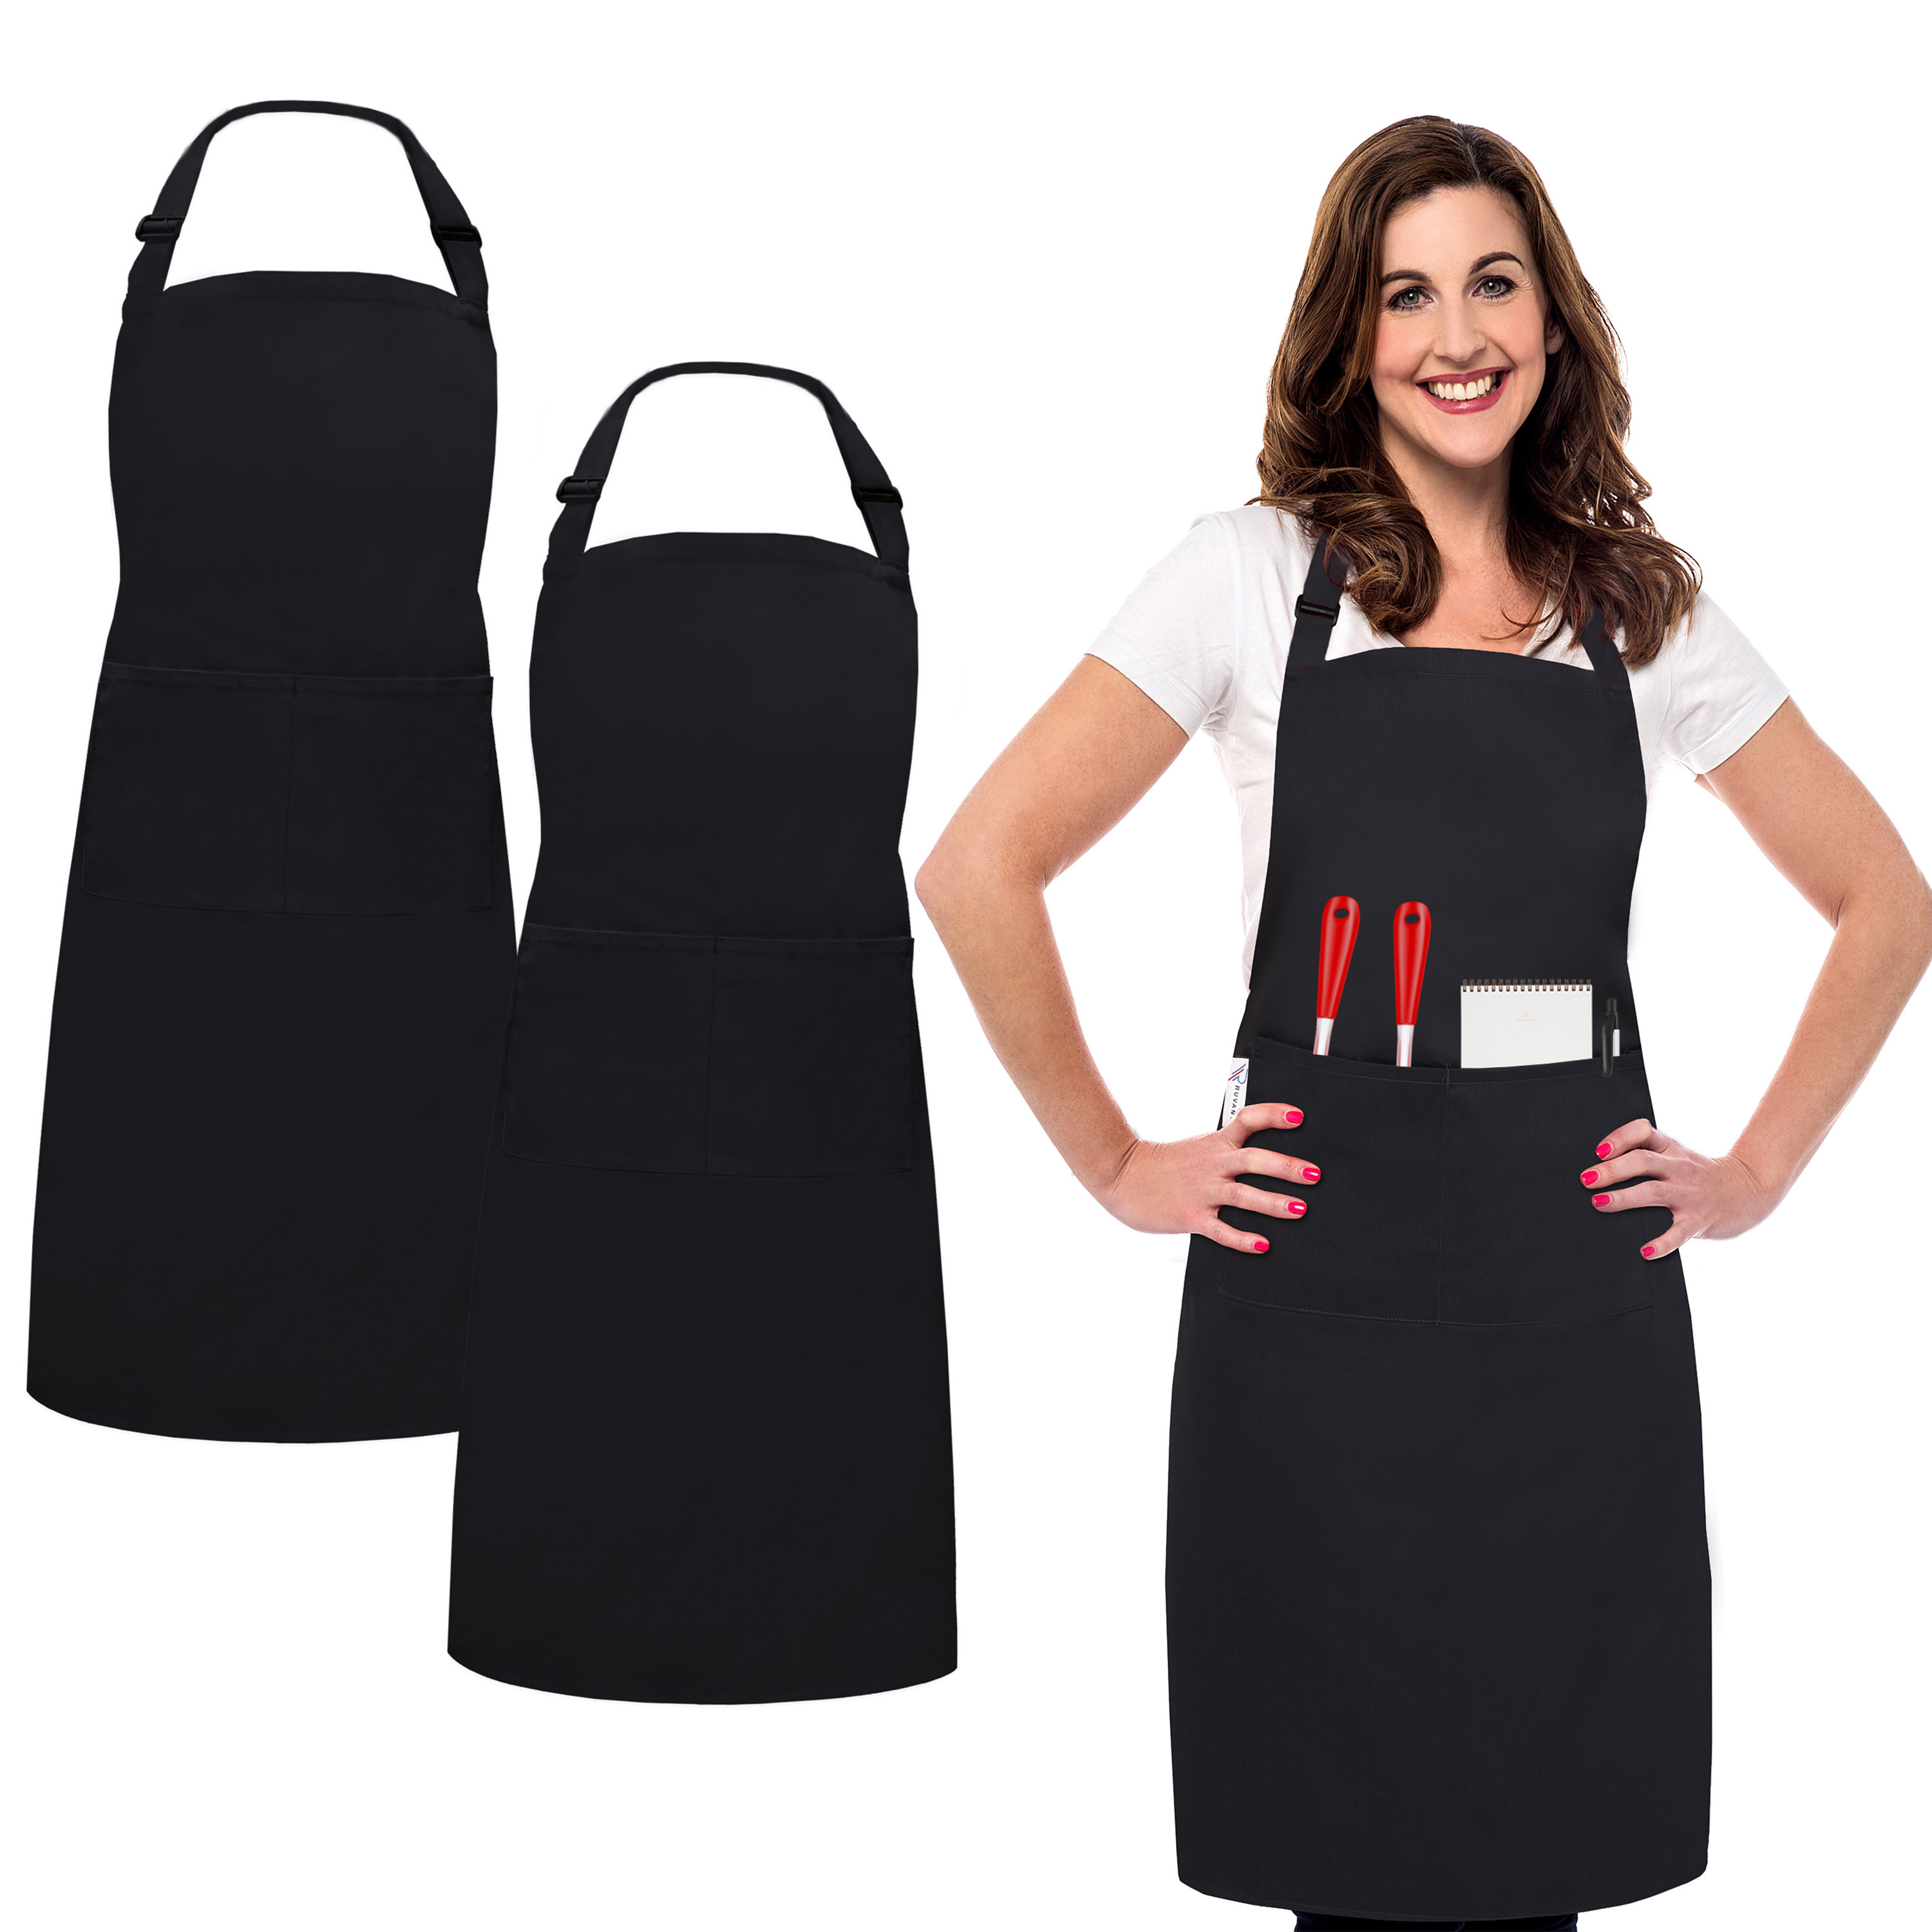 Mom's Kitchen Apron - The Collective Makers Studio